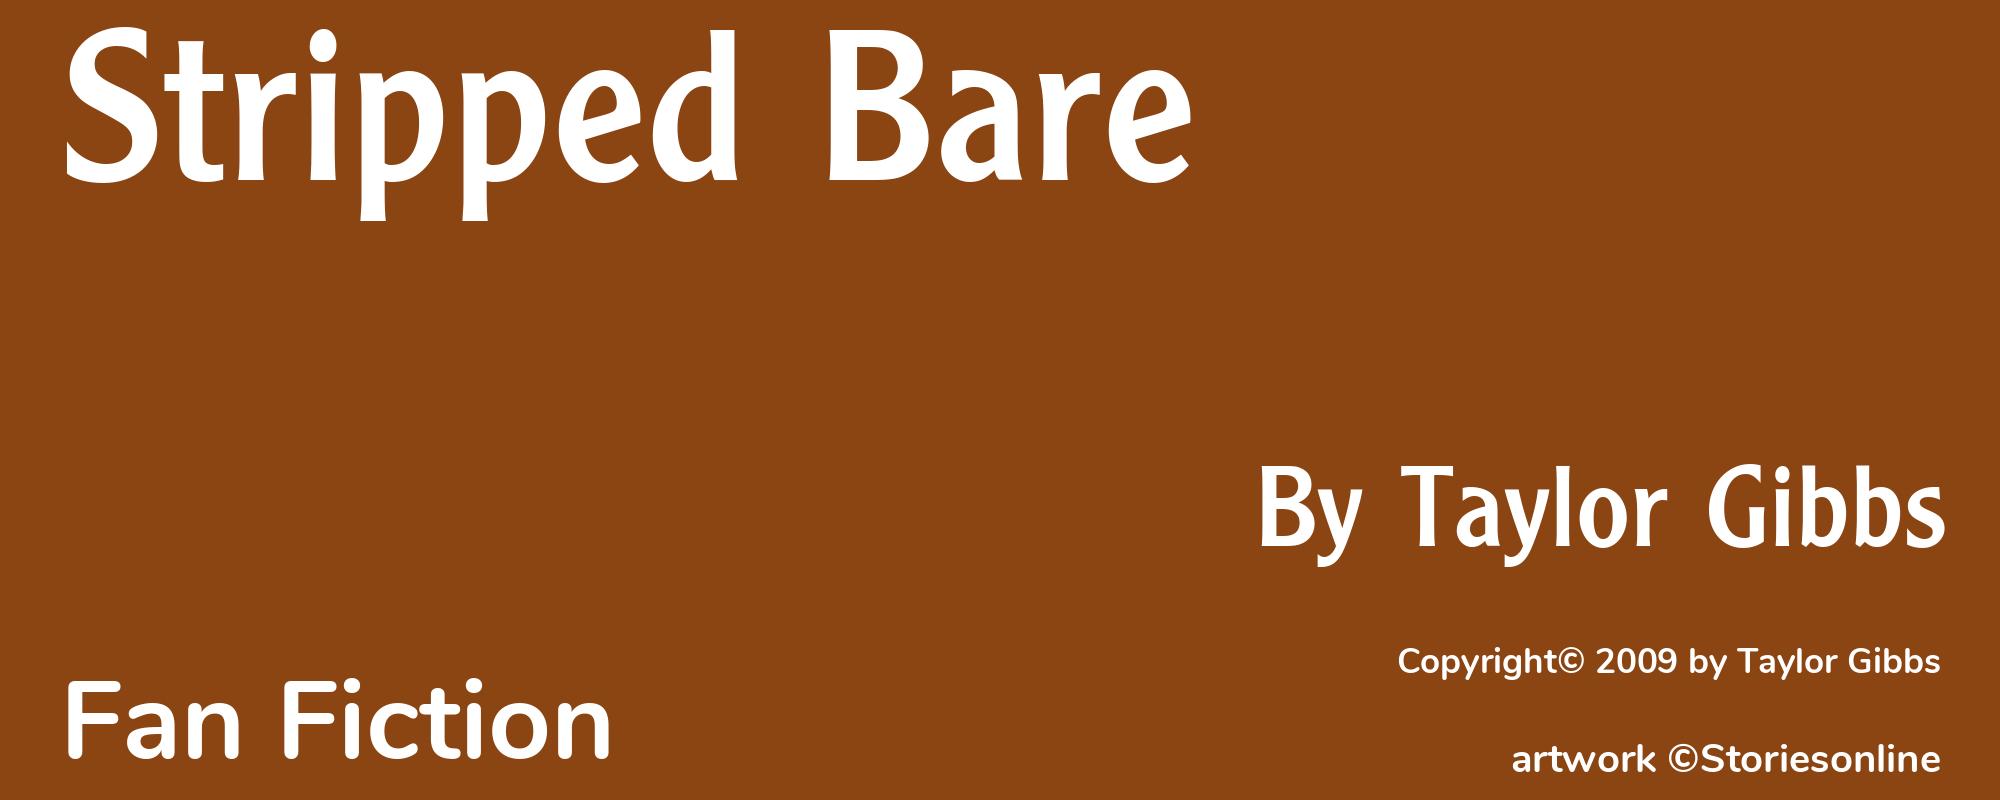 Stripped Bare - Cover